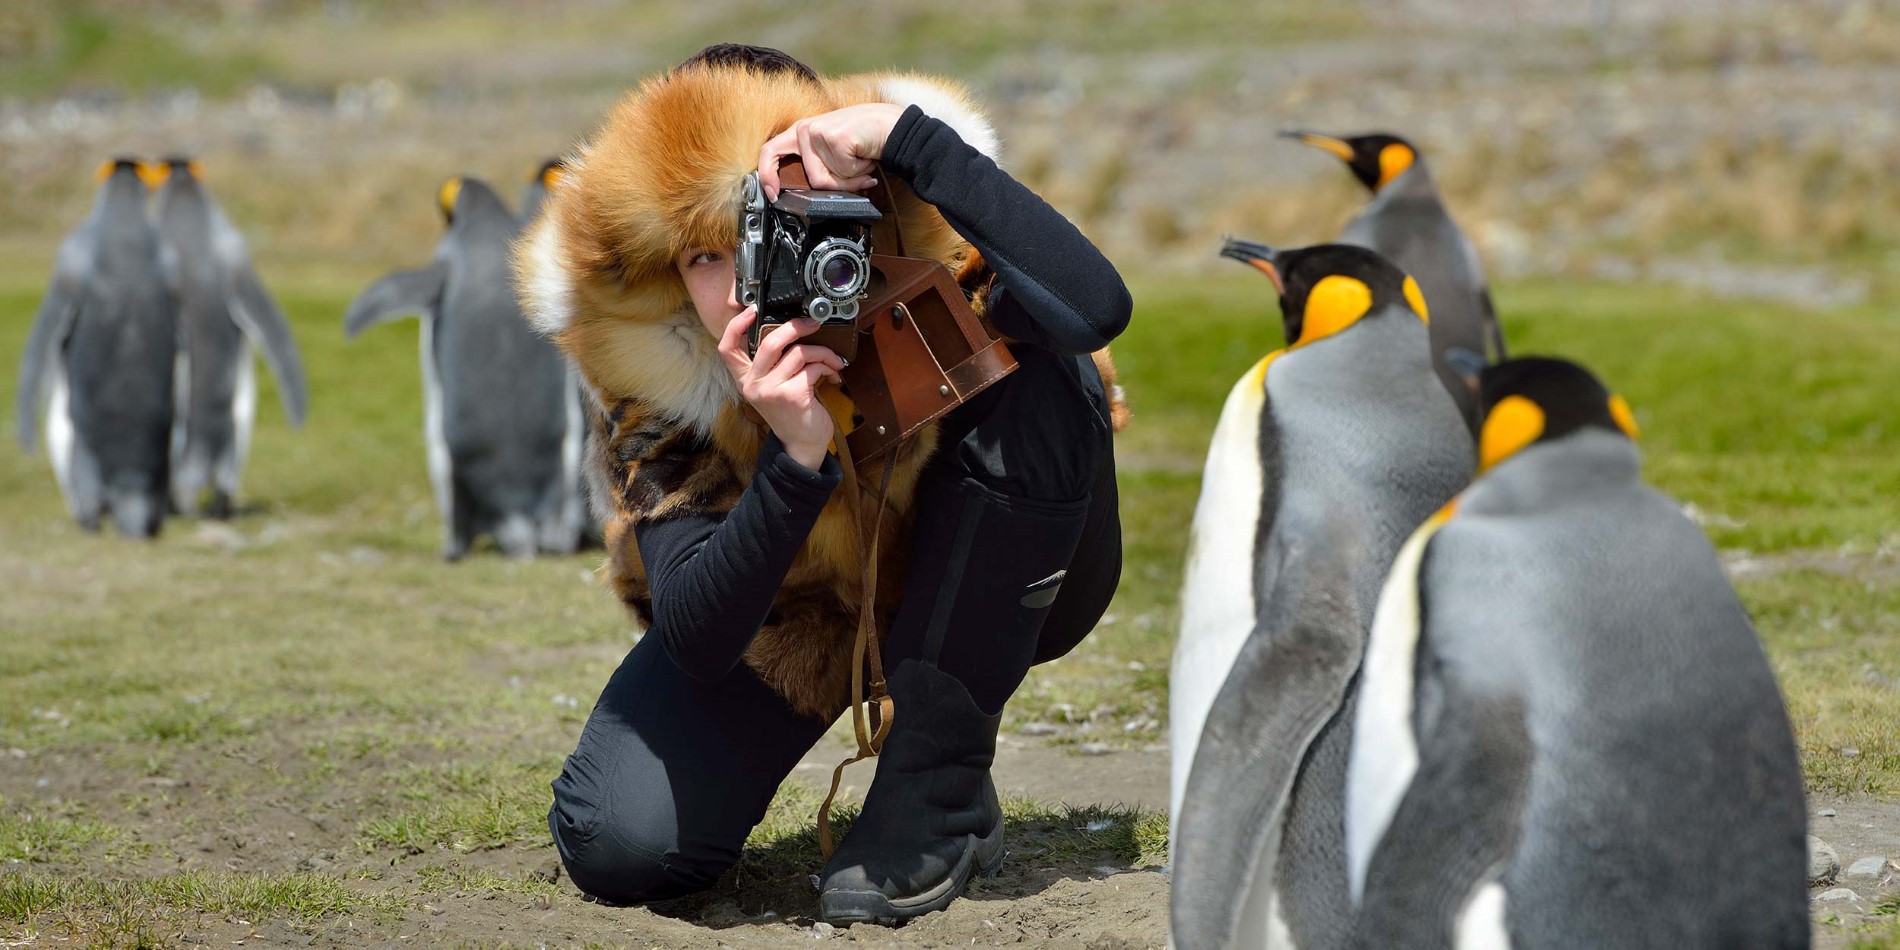 Woman with vintage camera taking a picture of penguins